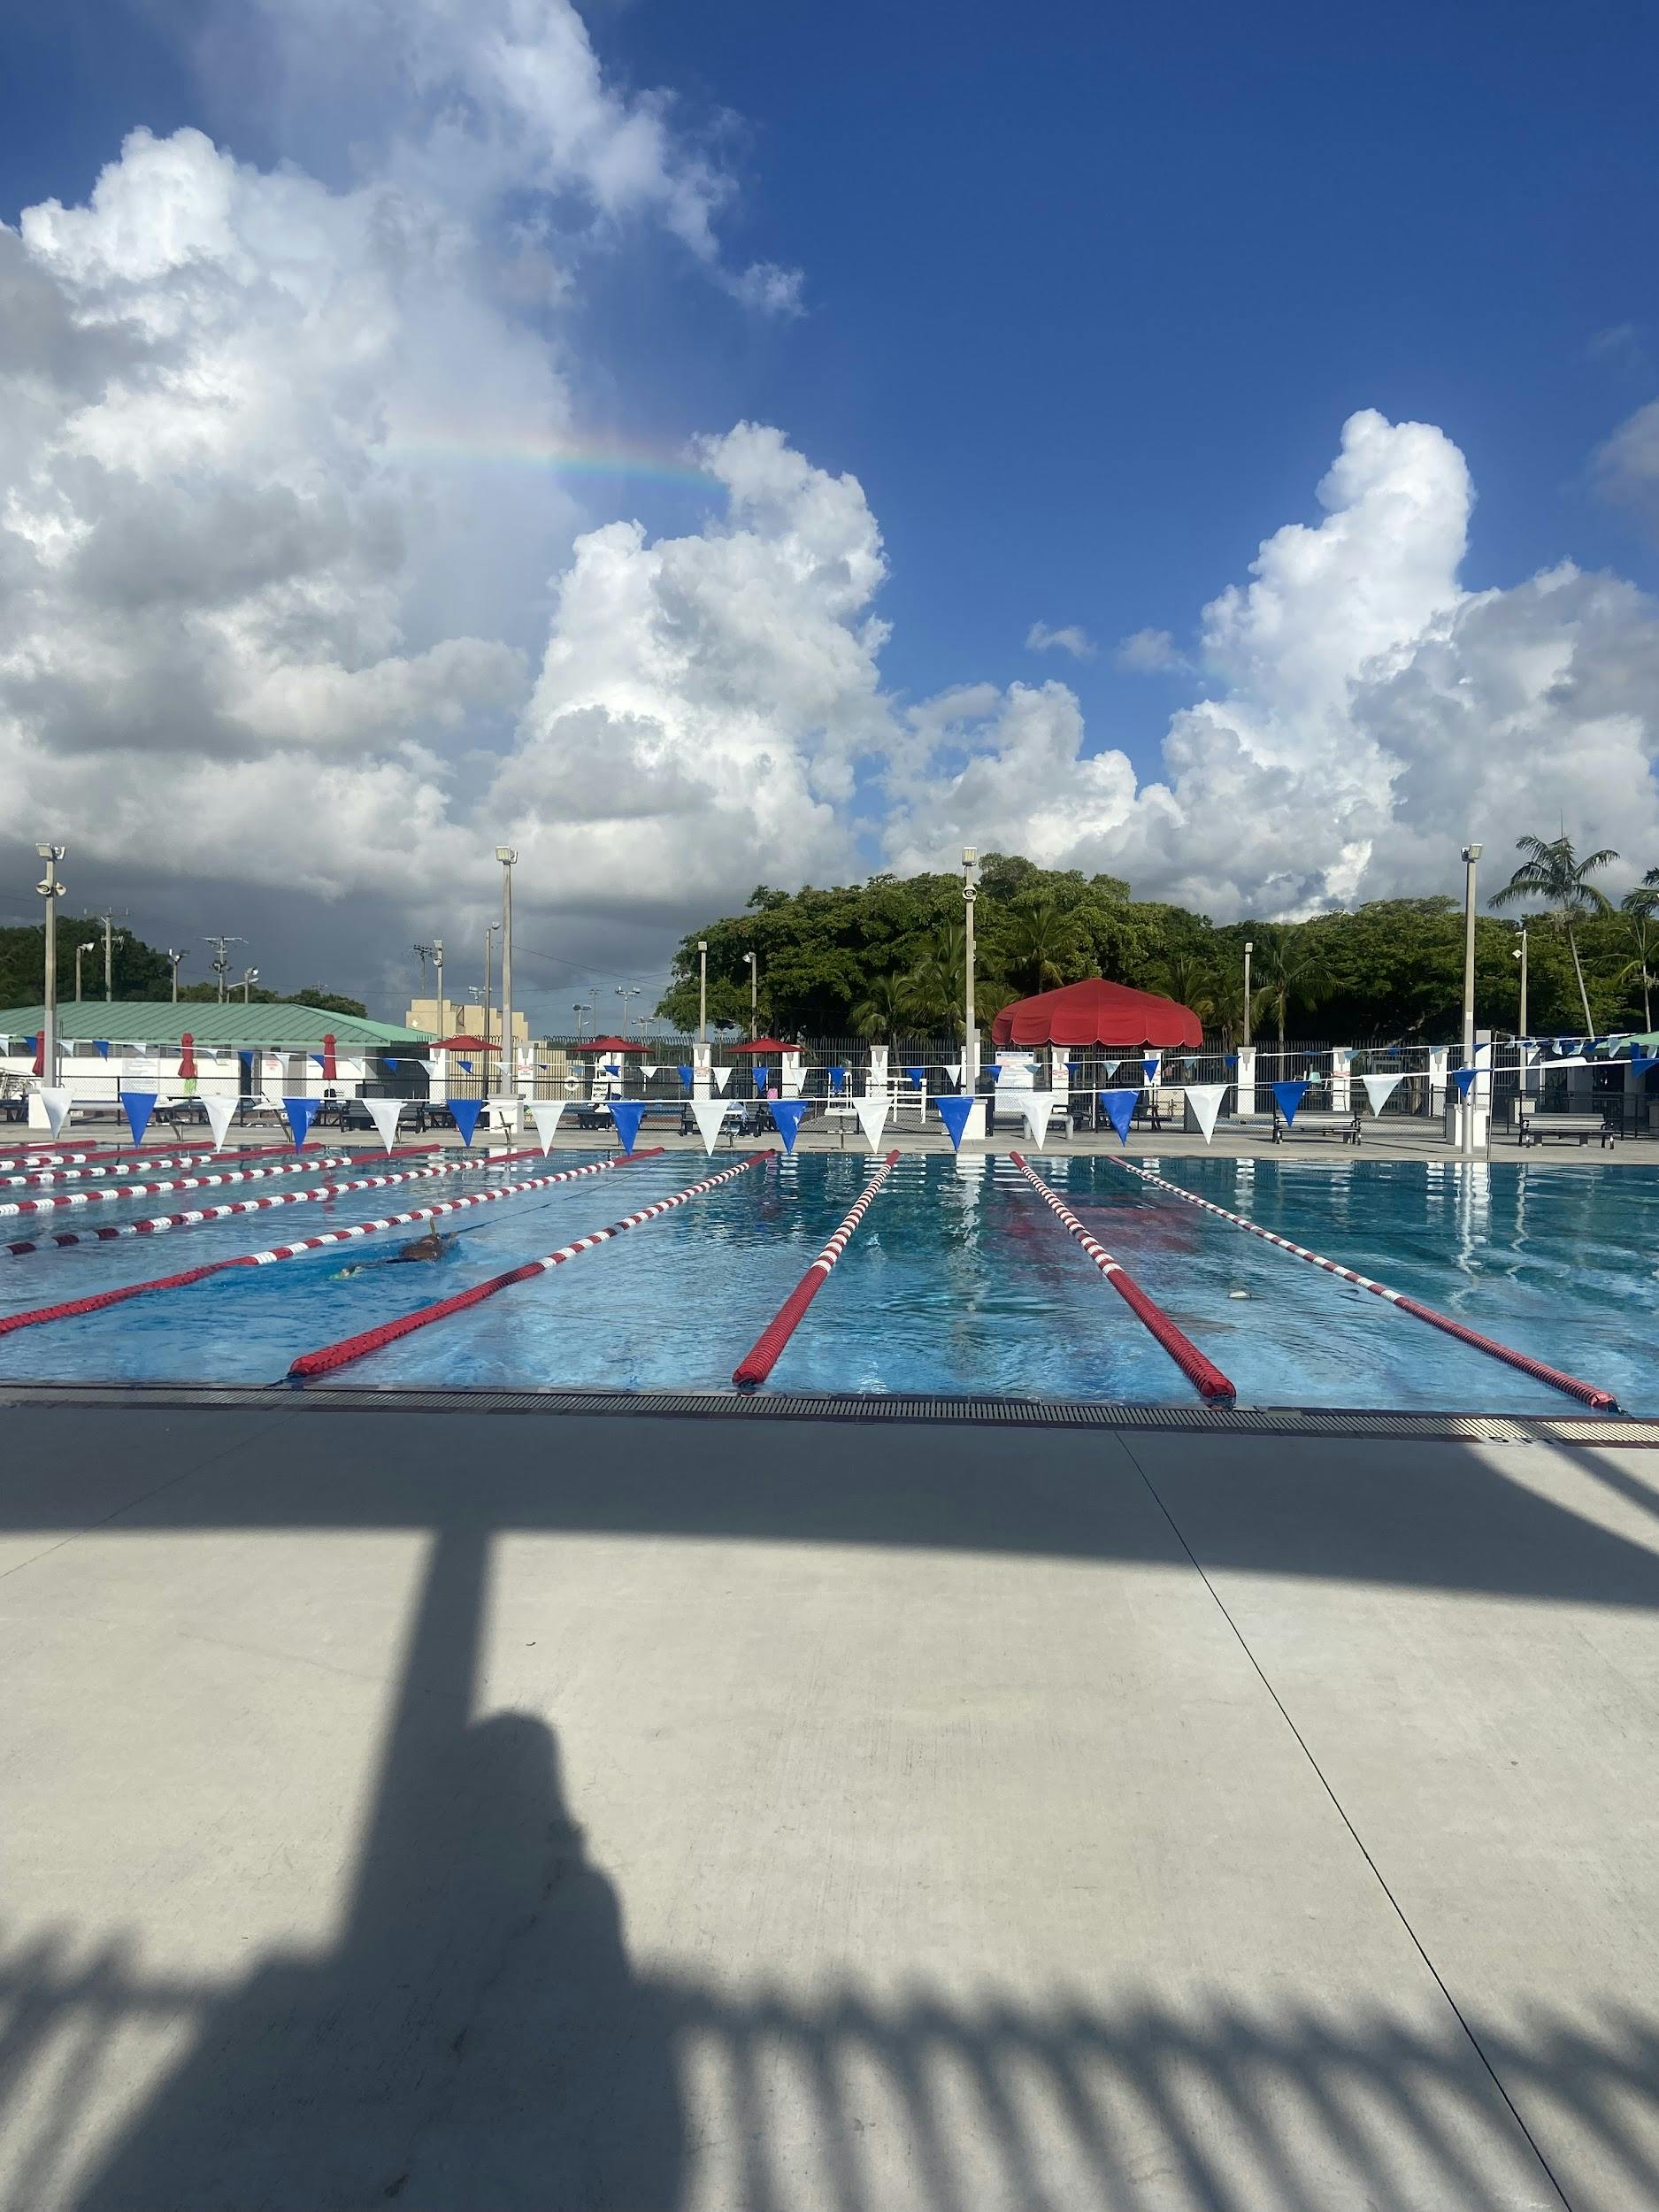 The Miller J. and Nancy S. Dawkins Olympic Swimming Pool Complex  Charles Hadley Park Pool